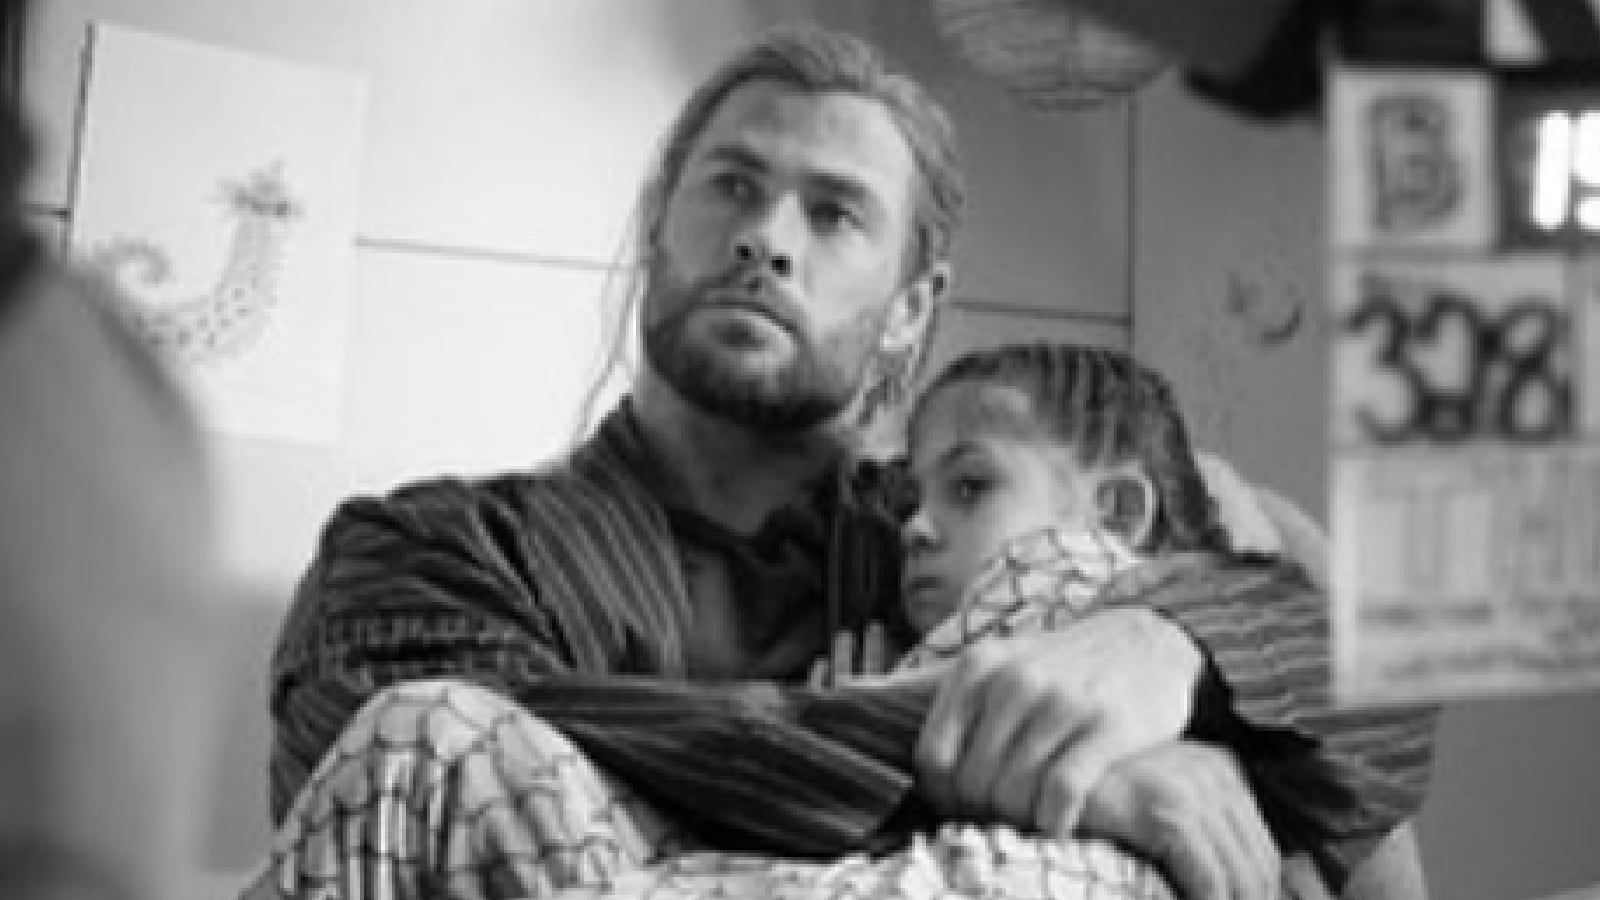 Chris Hemsworth Terms Daughter India Rose His Favourite Superhero See Adorable Pic From Thor